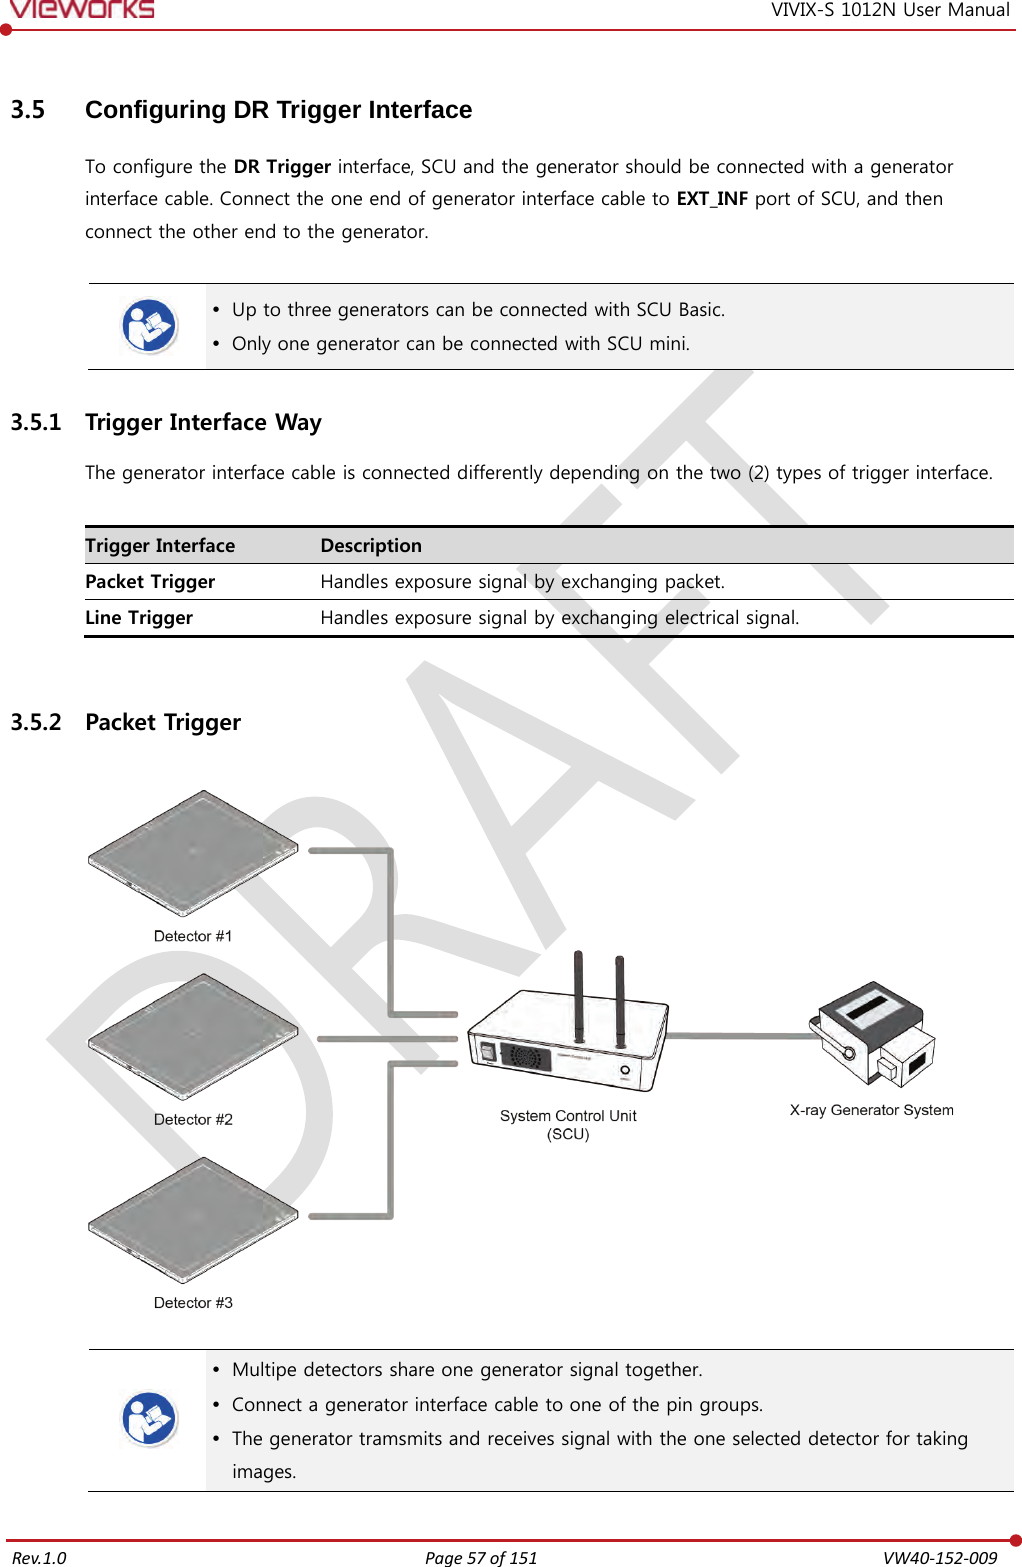   Rev.1.0 Page 57 of 151  VW40-152-009 VIVIX-S 1012N User Manual 3.5 Configuring DR Trigger Interface To configure the DR Trigger interface, SCU and the generator should be connected with a generator interface cable. Connect the one end of generator interface cable to EXT_INF port of SCU, and then connect the other end to the generator.    Up to three generators can be connected with SCU Basic.  Only one generator can be connected with SCU mini. 3.5.1 Trigger Interface Way The generator interface cable is connected differently depending on the two (2) types of trigger interface.  Trigger Interface Description Packet Trigger Handles exposure signal by exchanging packet. Line Trigger Handles exposure signal by exchanging electrical signal.  3.5.2 Packet Trigger      Multipe detectors share one generator signal together.  Connect a generator interface cable to one of the pin groups.  The generator tramsmits and receives signal with the one selected detector for taking images.  